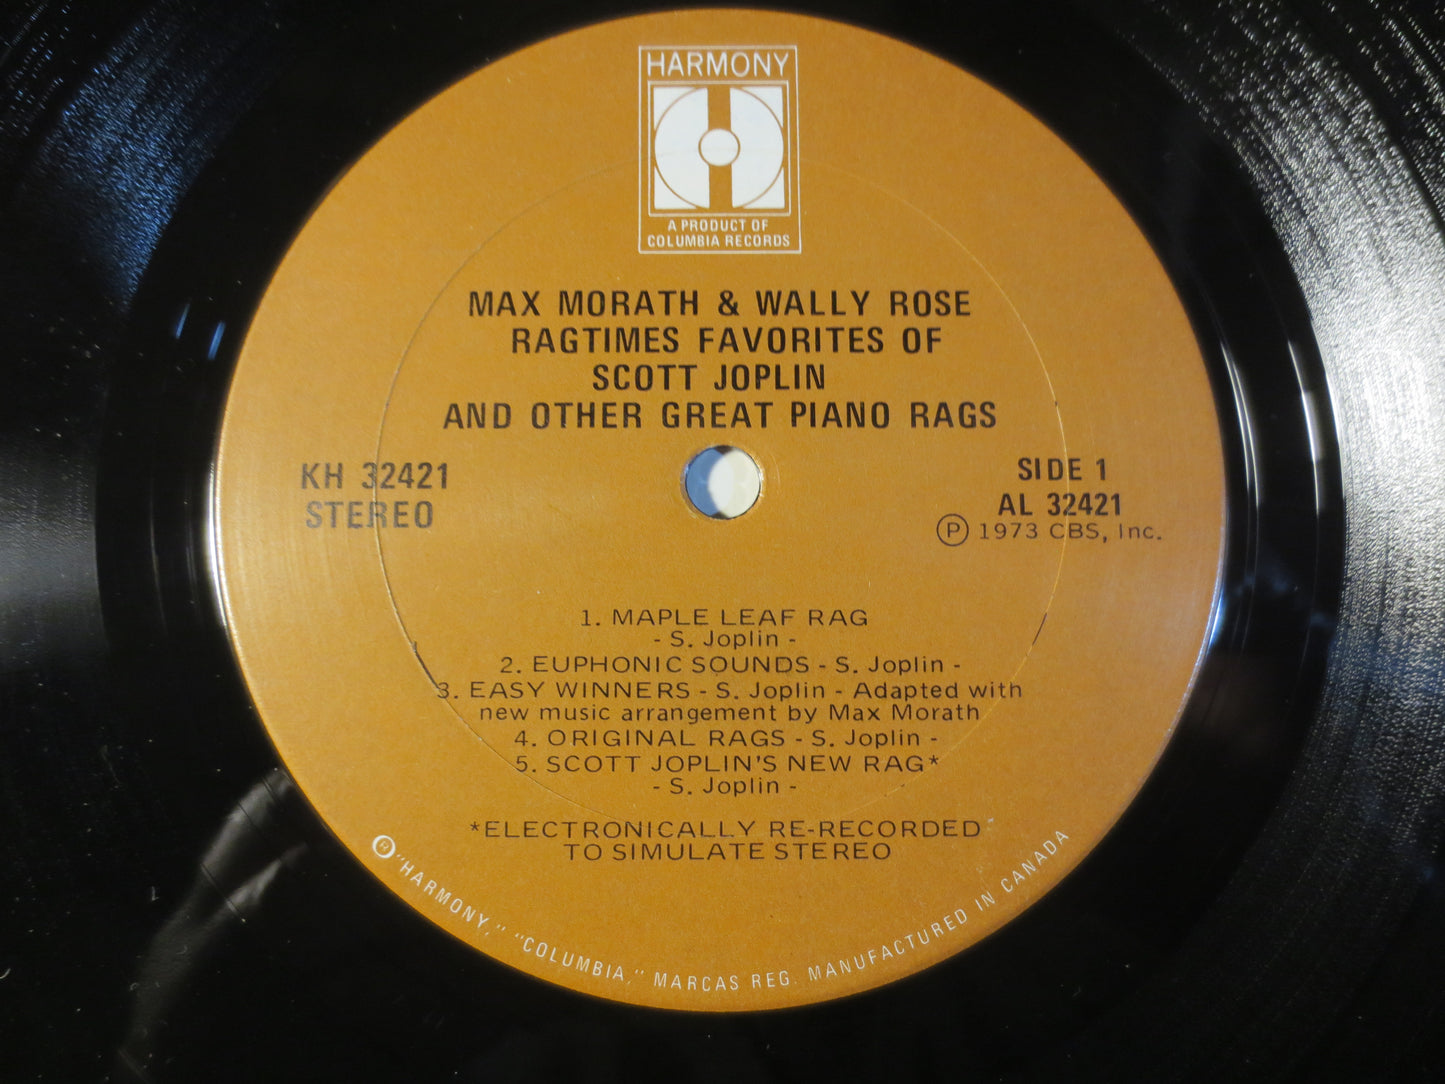 MAX MORATH, Wally ROSE, Ragtime Favorites, Ragtime Records, Honky Tonk Records, Vinyl Record, Record Vinyl, 1973 Records